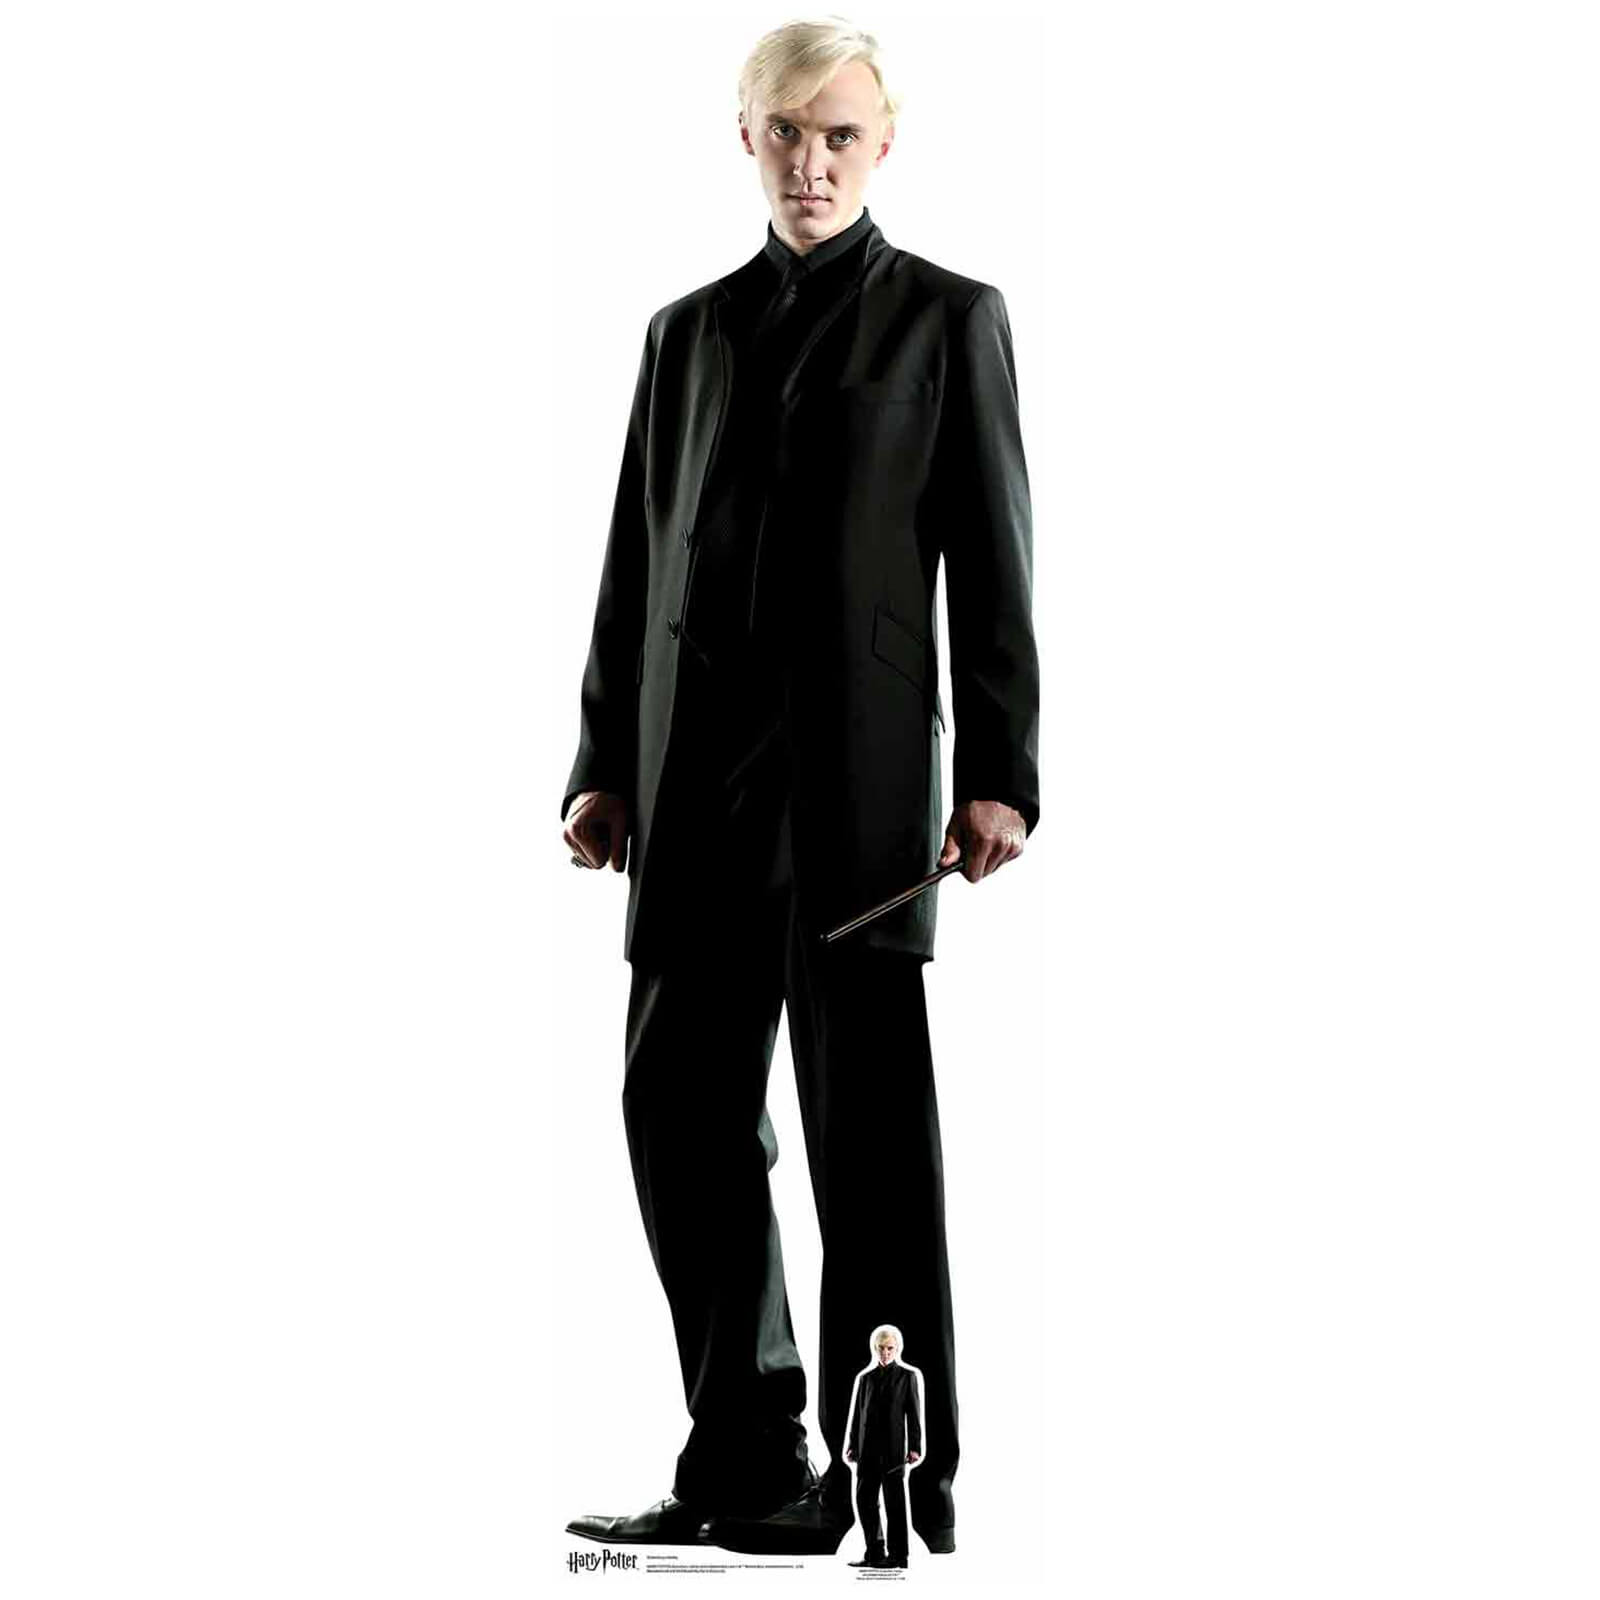 Draco Malfoy Life Sized Cut Out